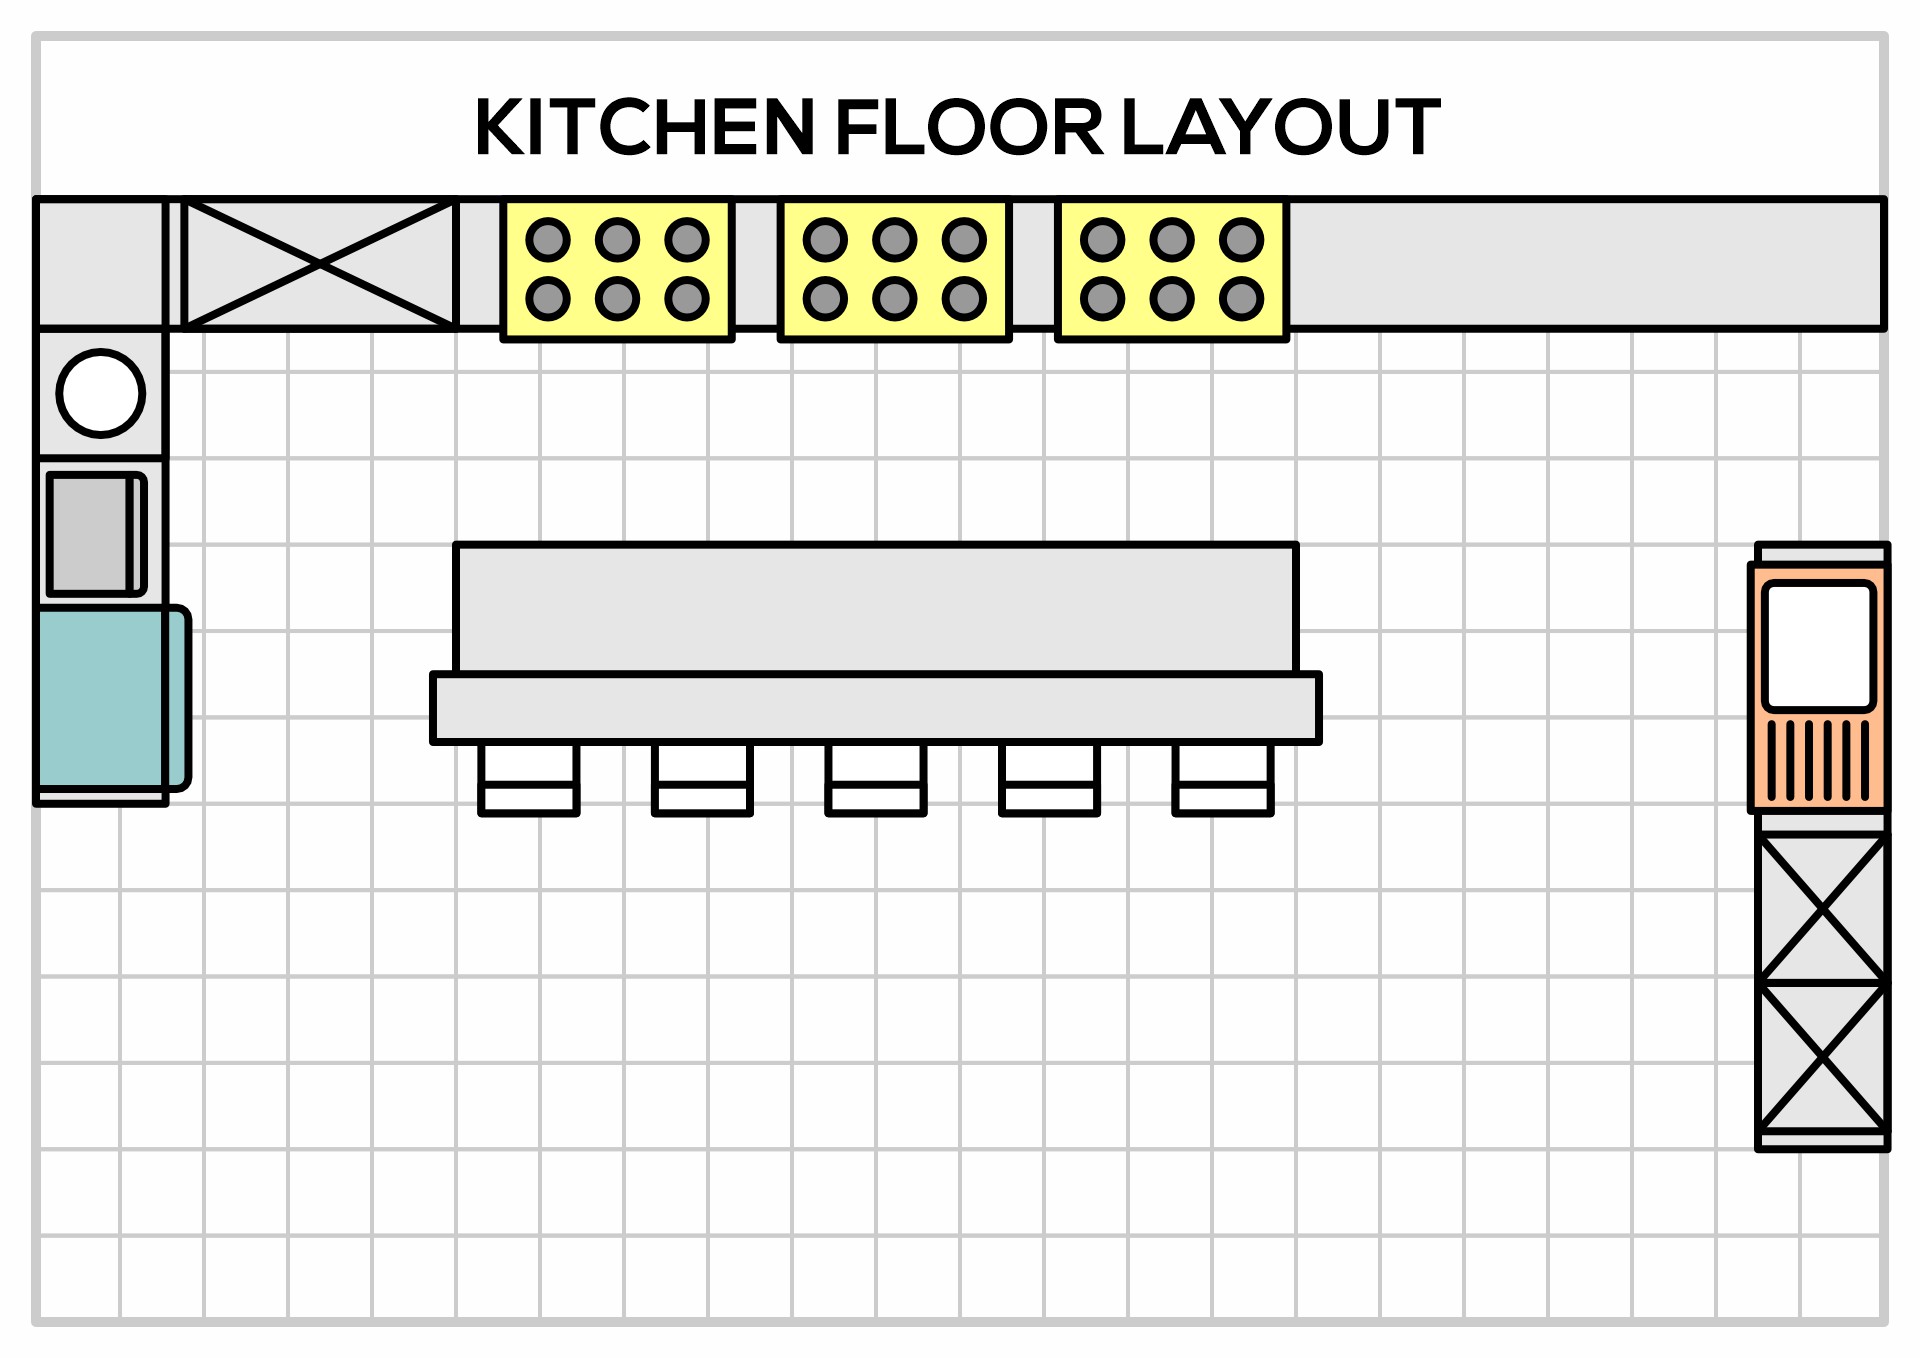 11 Best Images of 12 X 12 Kitchen Design - Small Kitchen Layout Plans